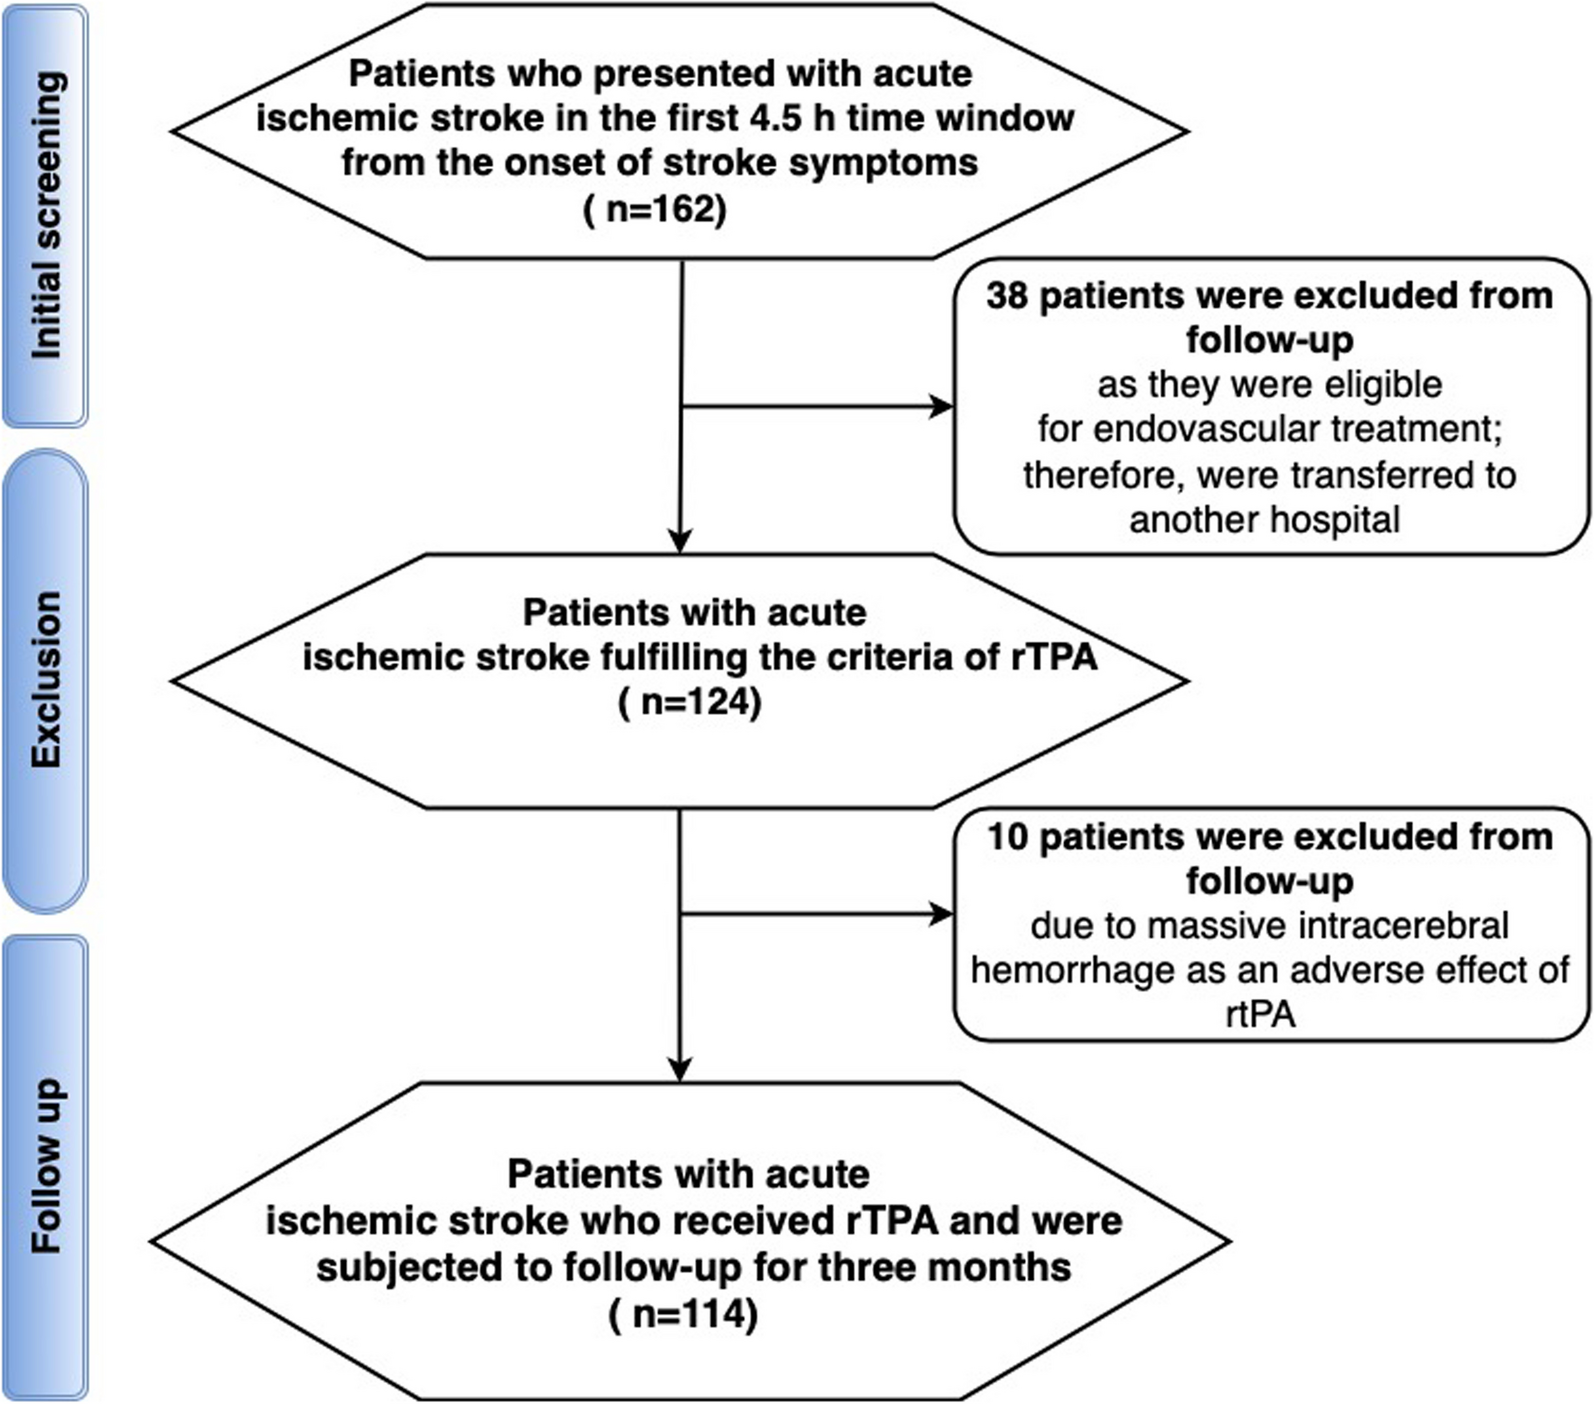 Factors predicting functional outcome after rtPA for patients with acute ischemic stroke